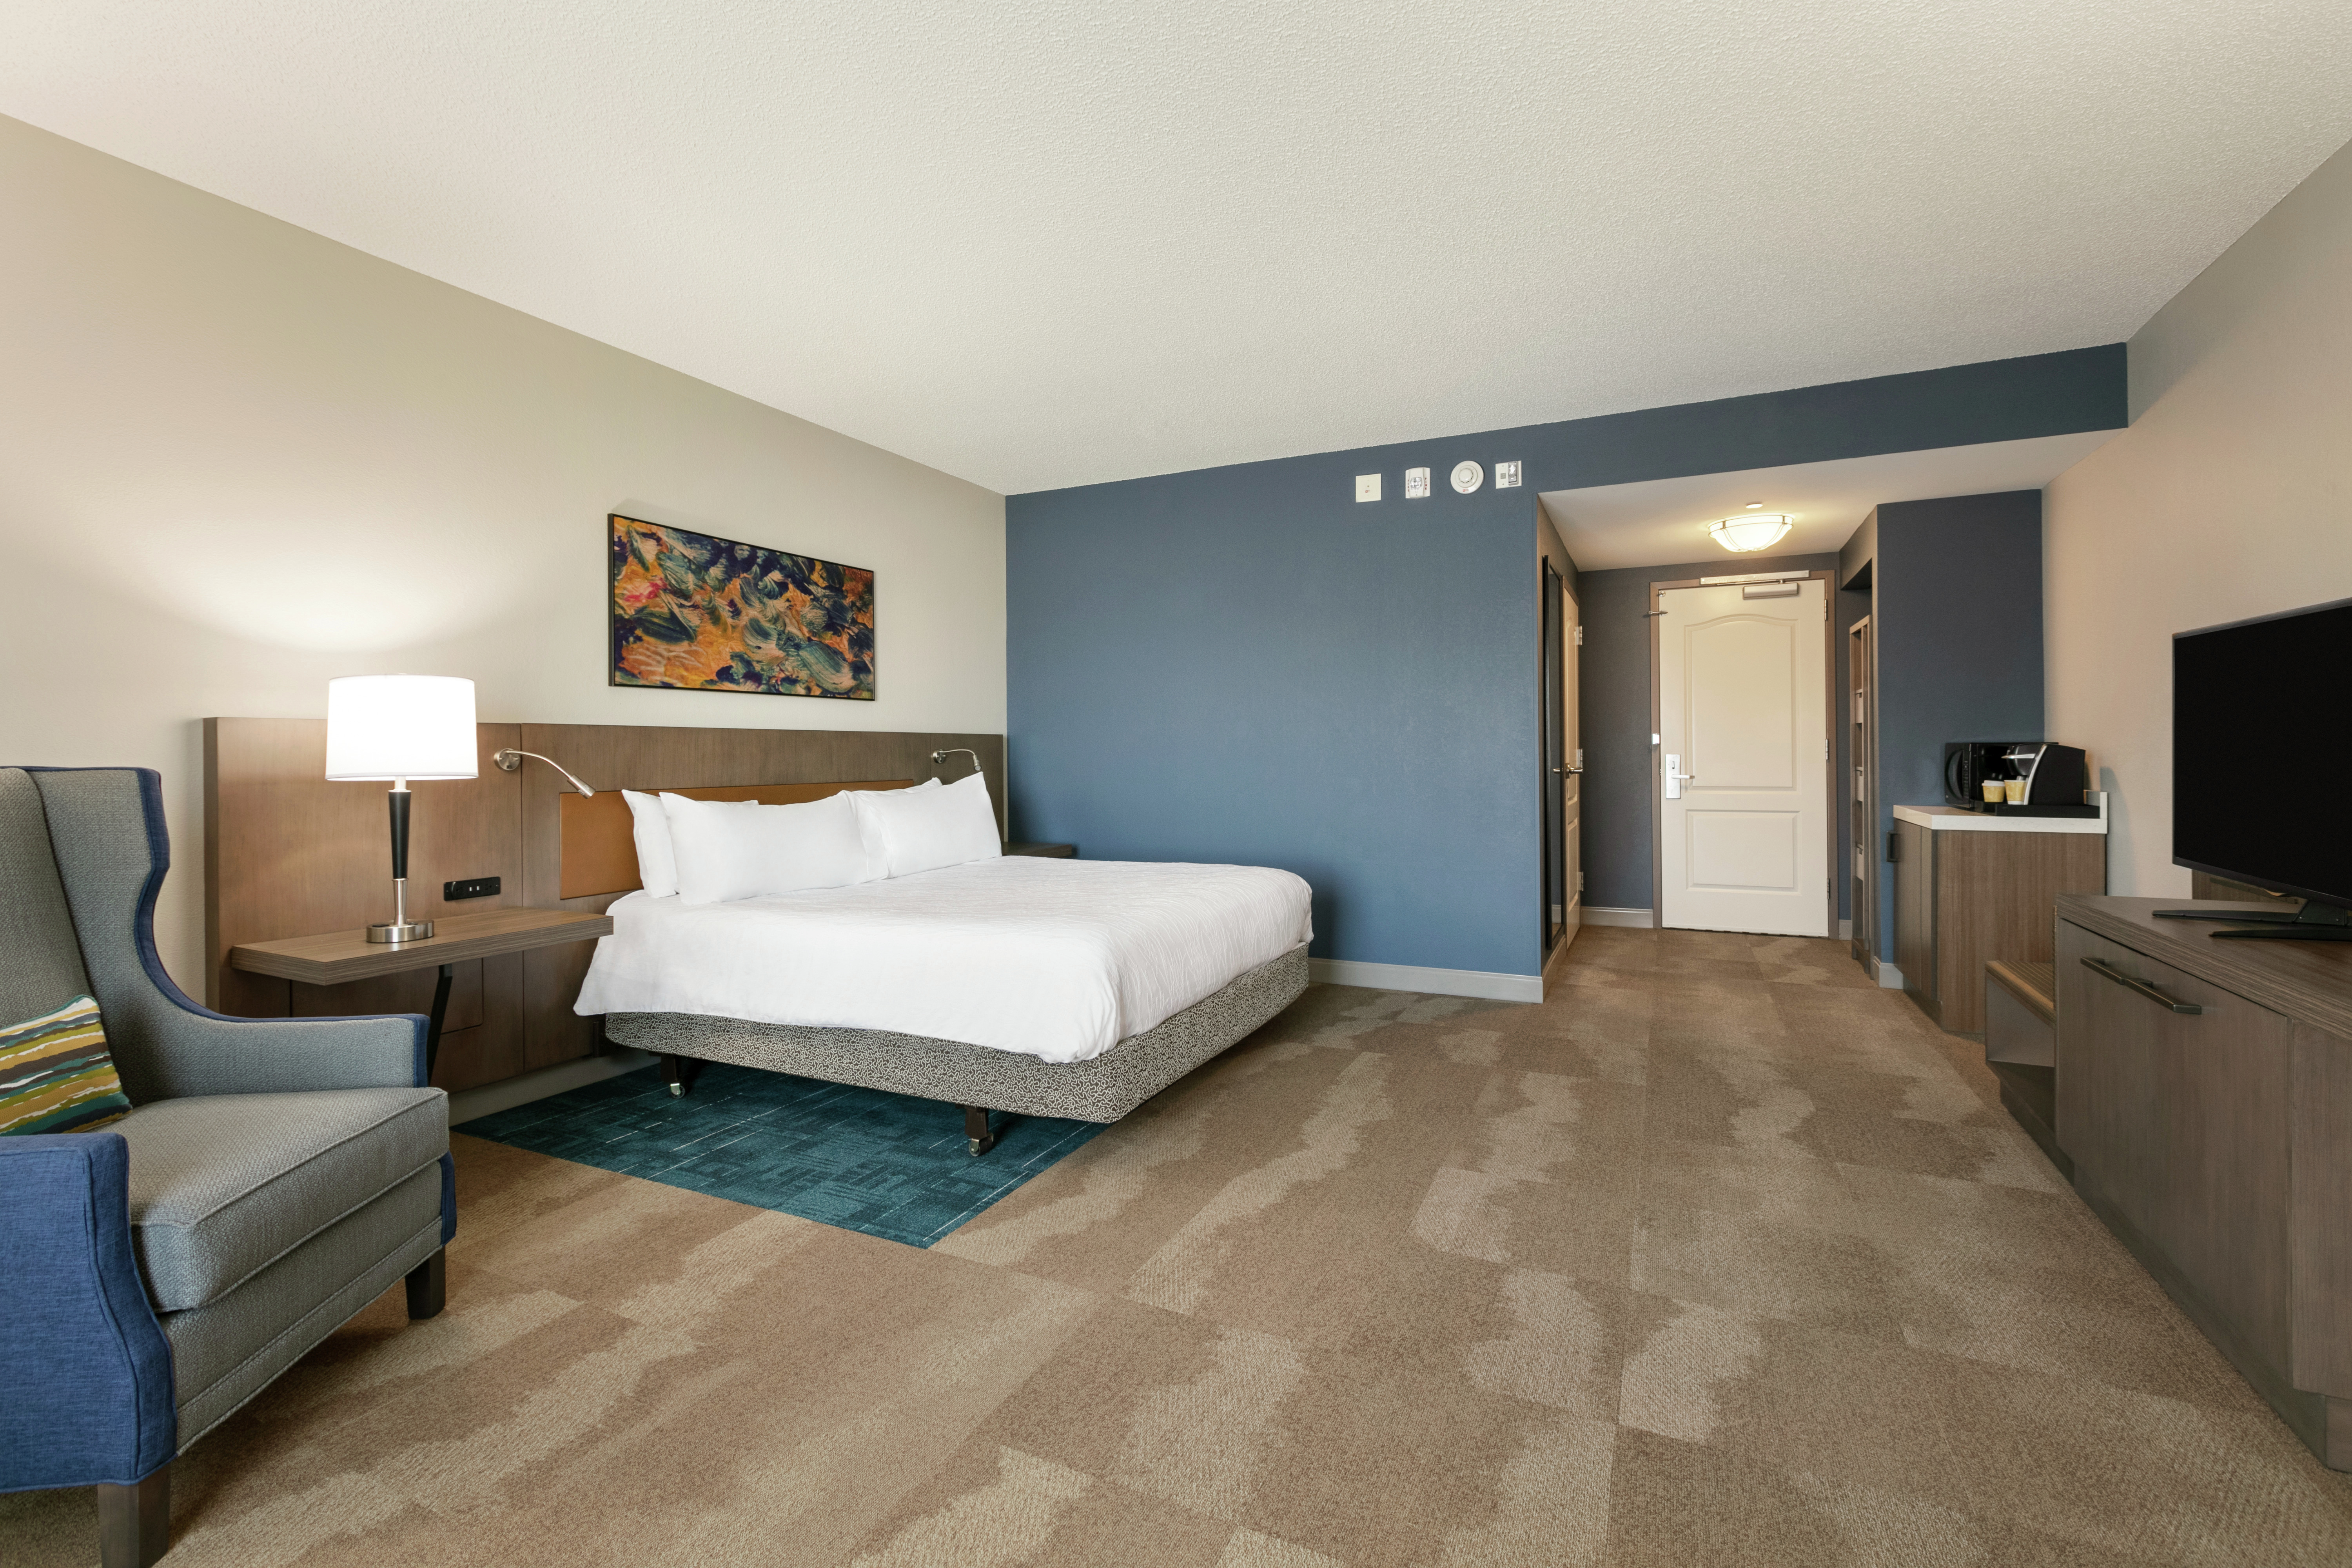 Accessible King Guestroom with Bed, Lounge Area, and Room Technology